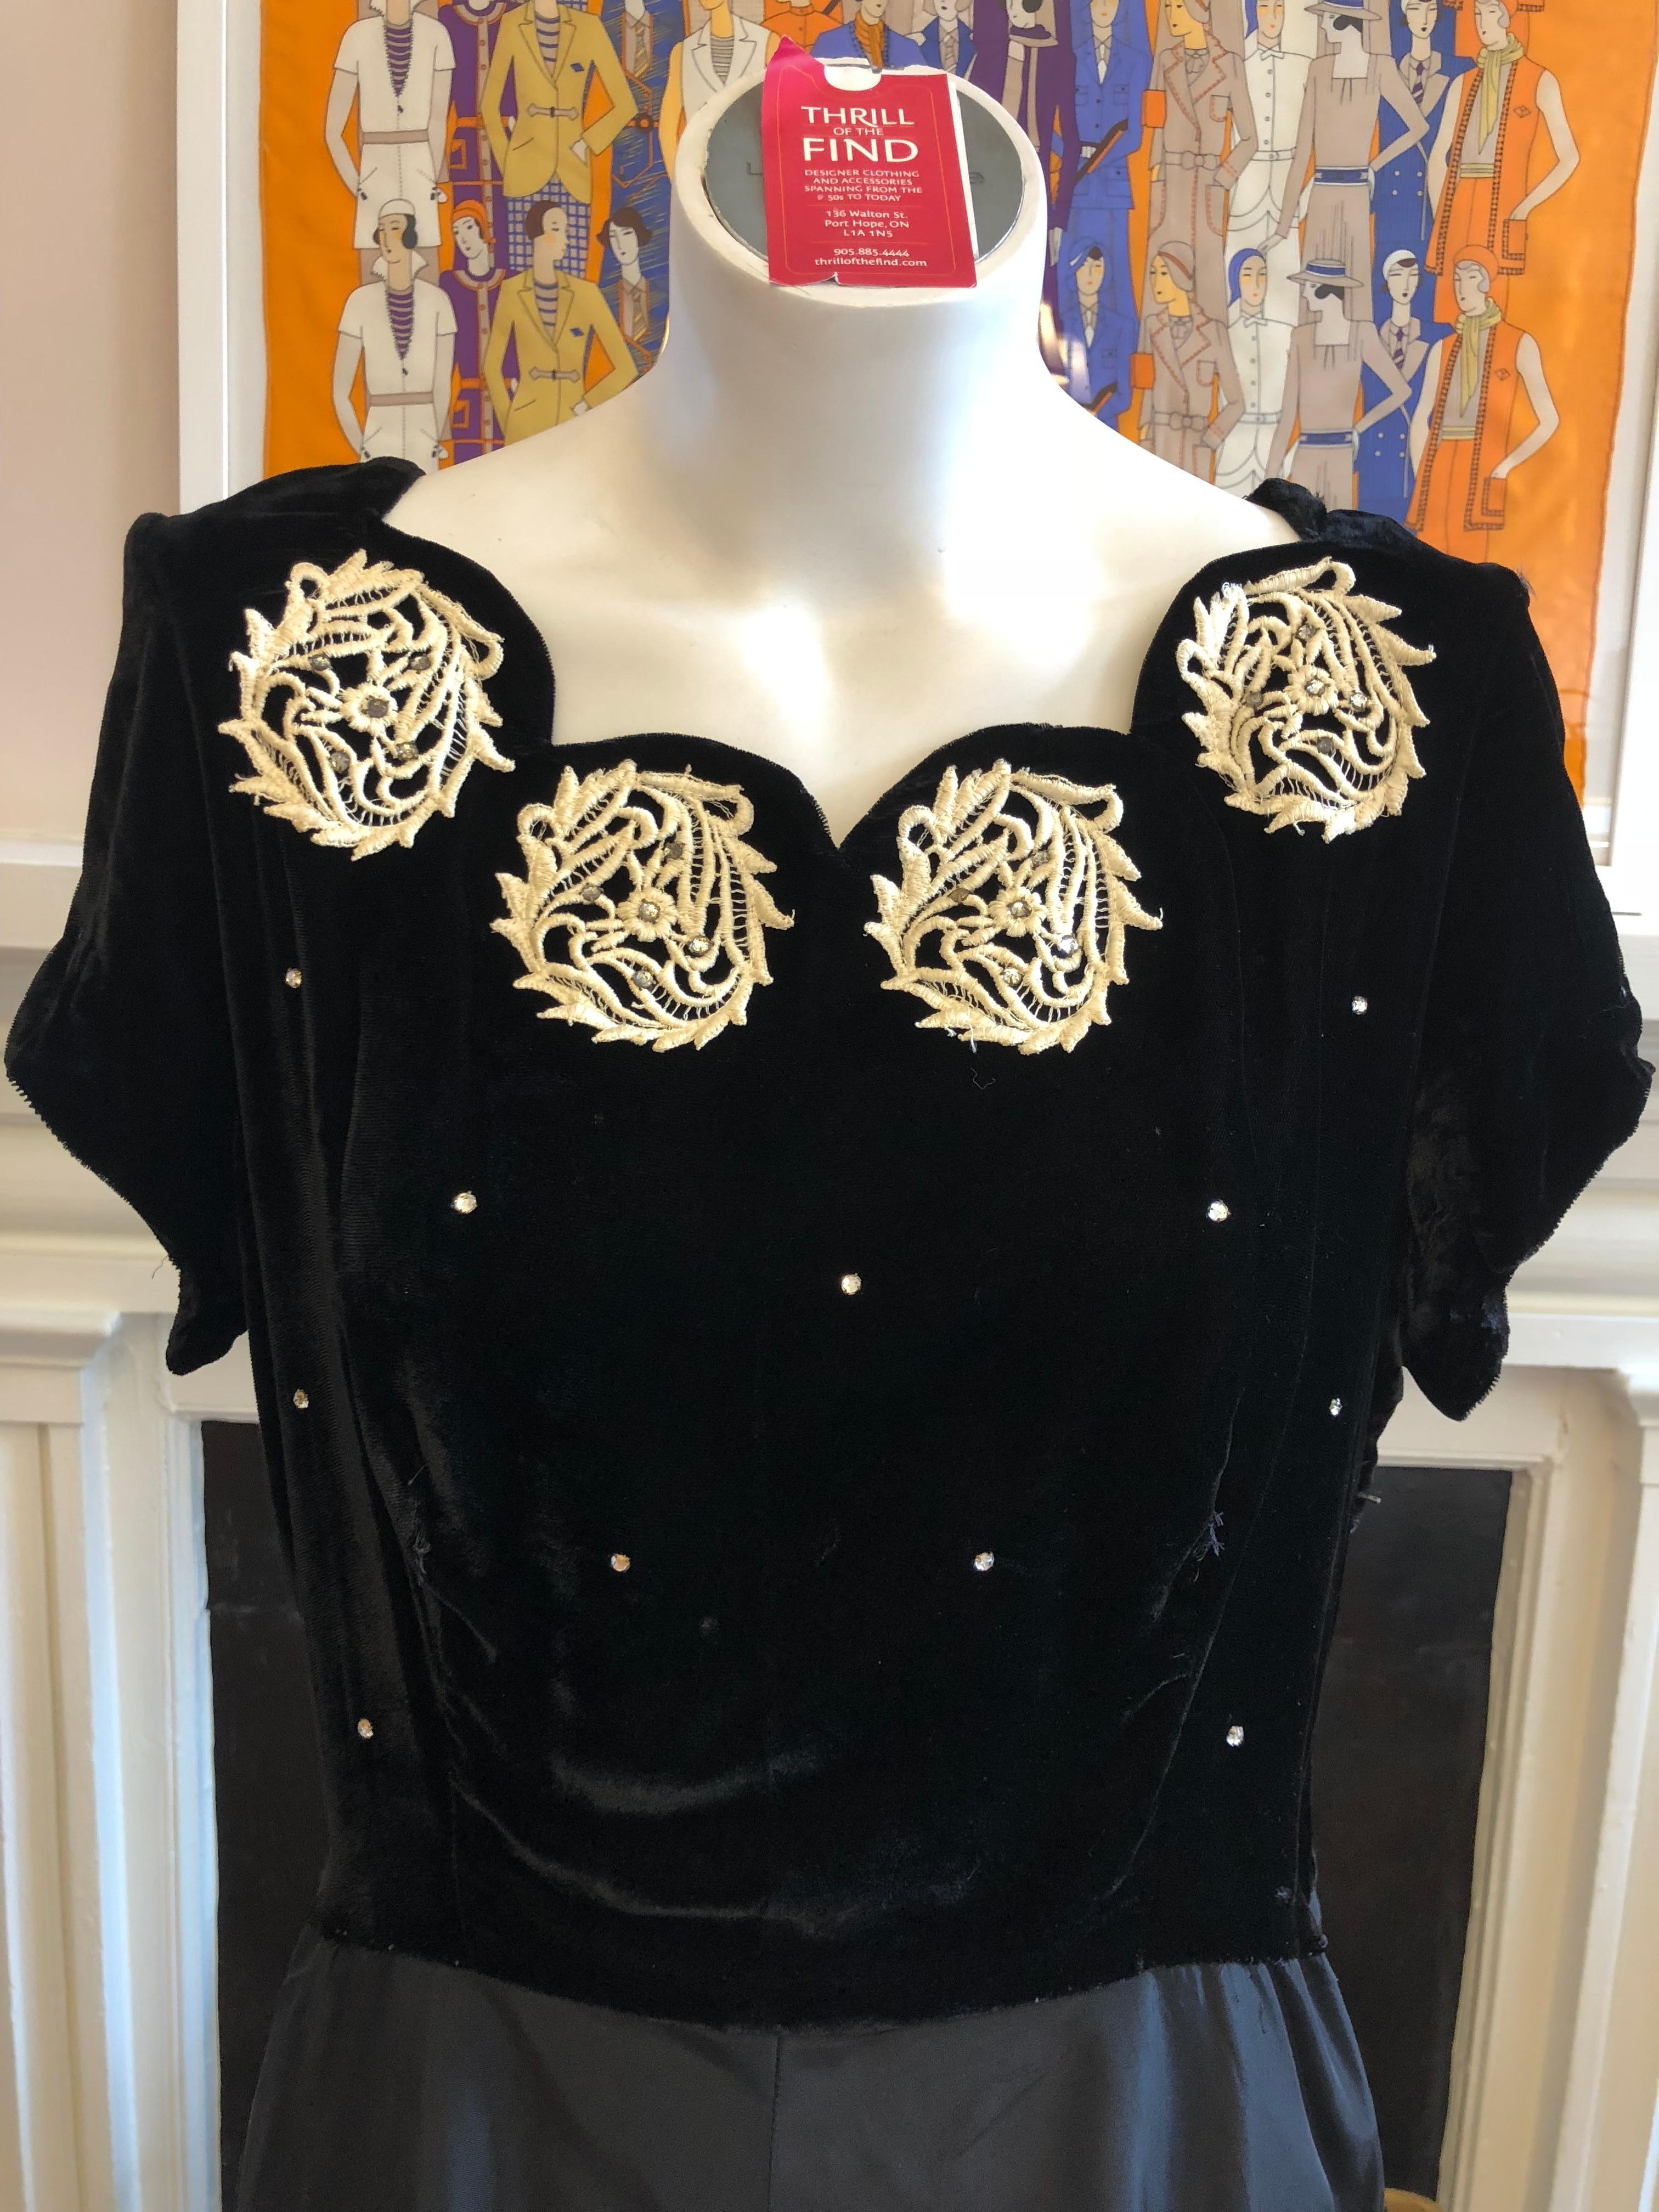 This tailored dress is in great condition for its age. The upper part is velvet embellished with embroidery and has a scalloped neckline and diamente. The rayon skirt has a shine and upon close inspection some slight discoloration.